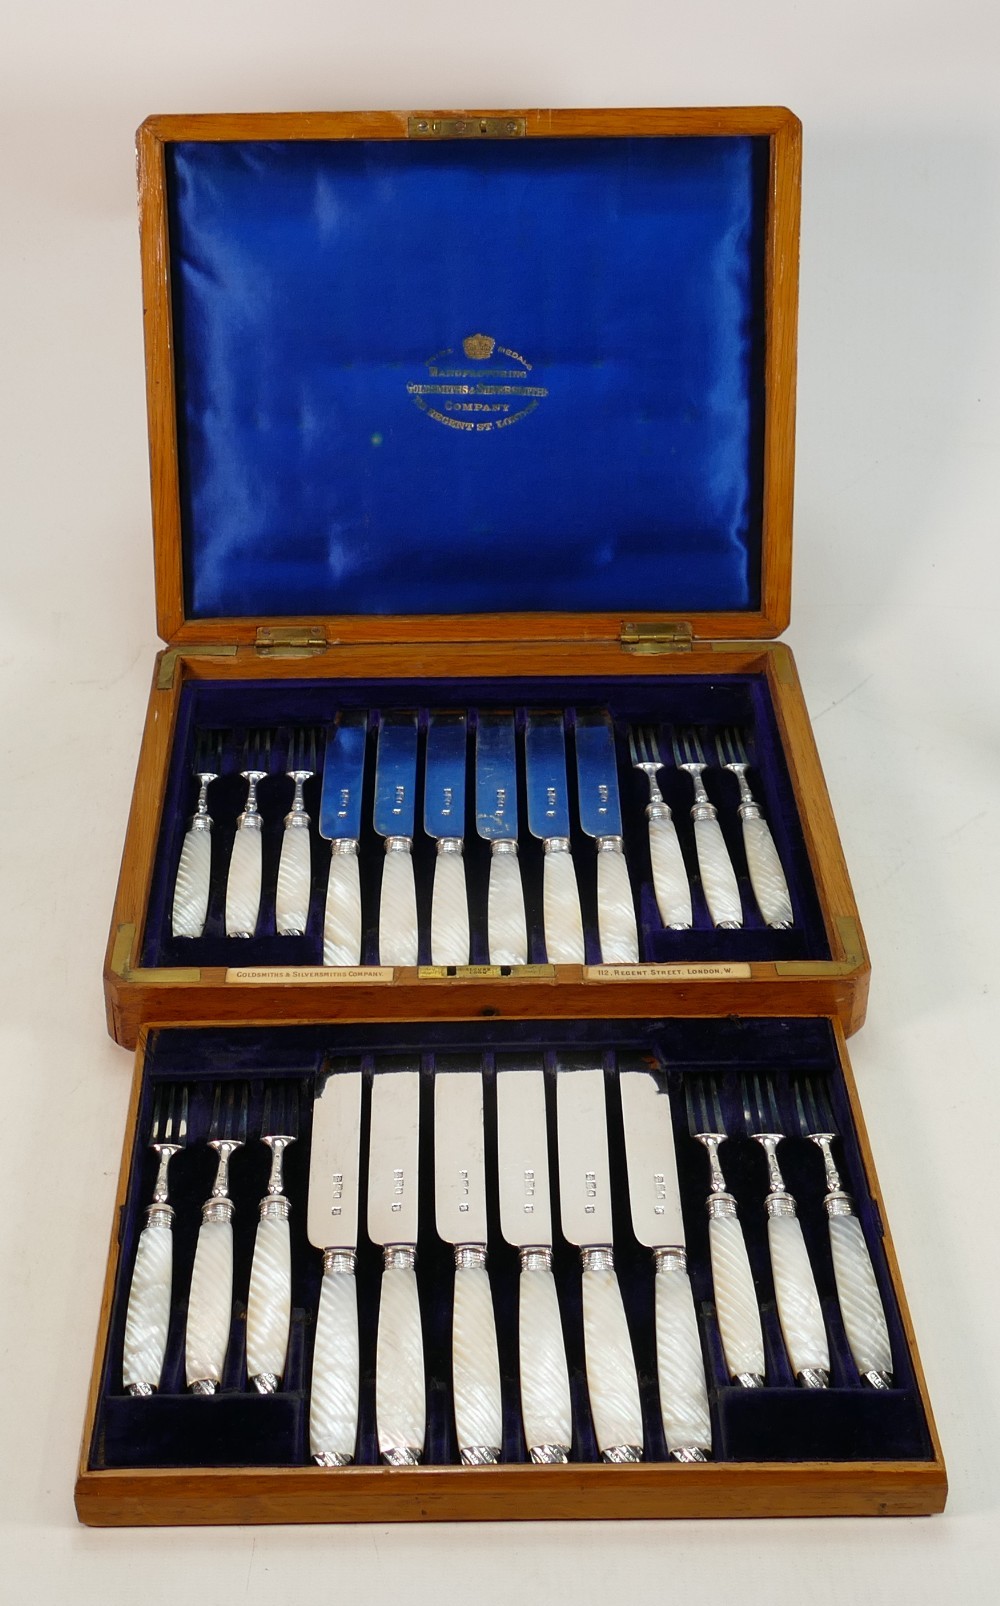 Mother of pearl handled silver hallmarked fruit knives and forks: Cased set for 12 persons in 2